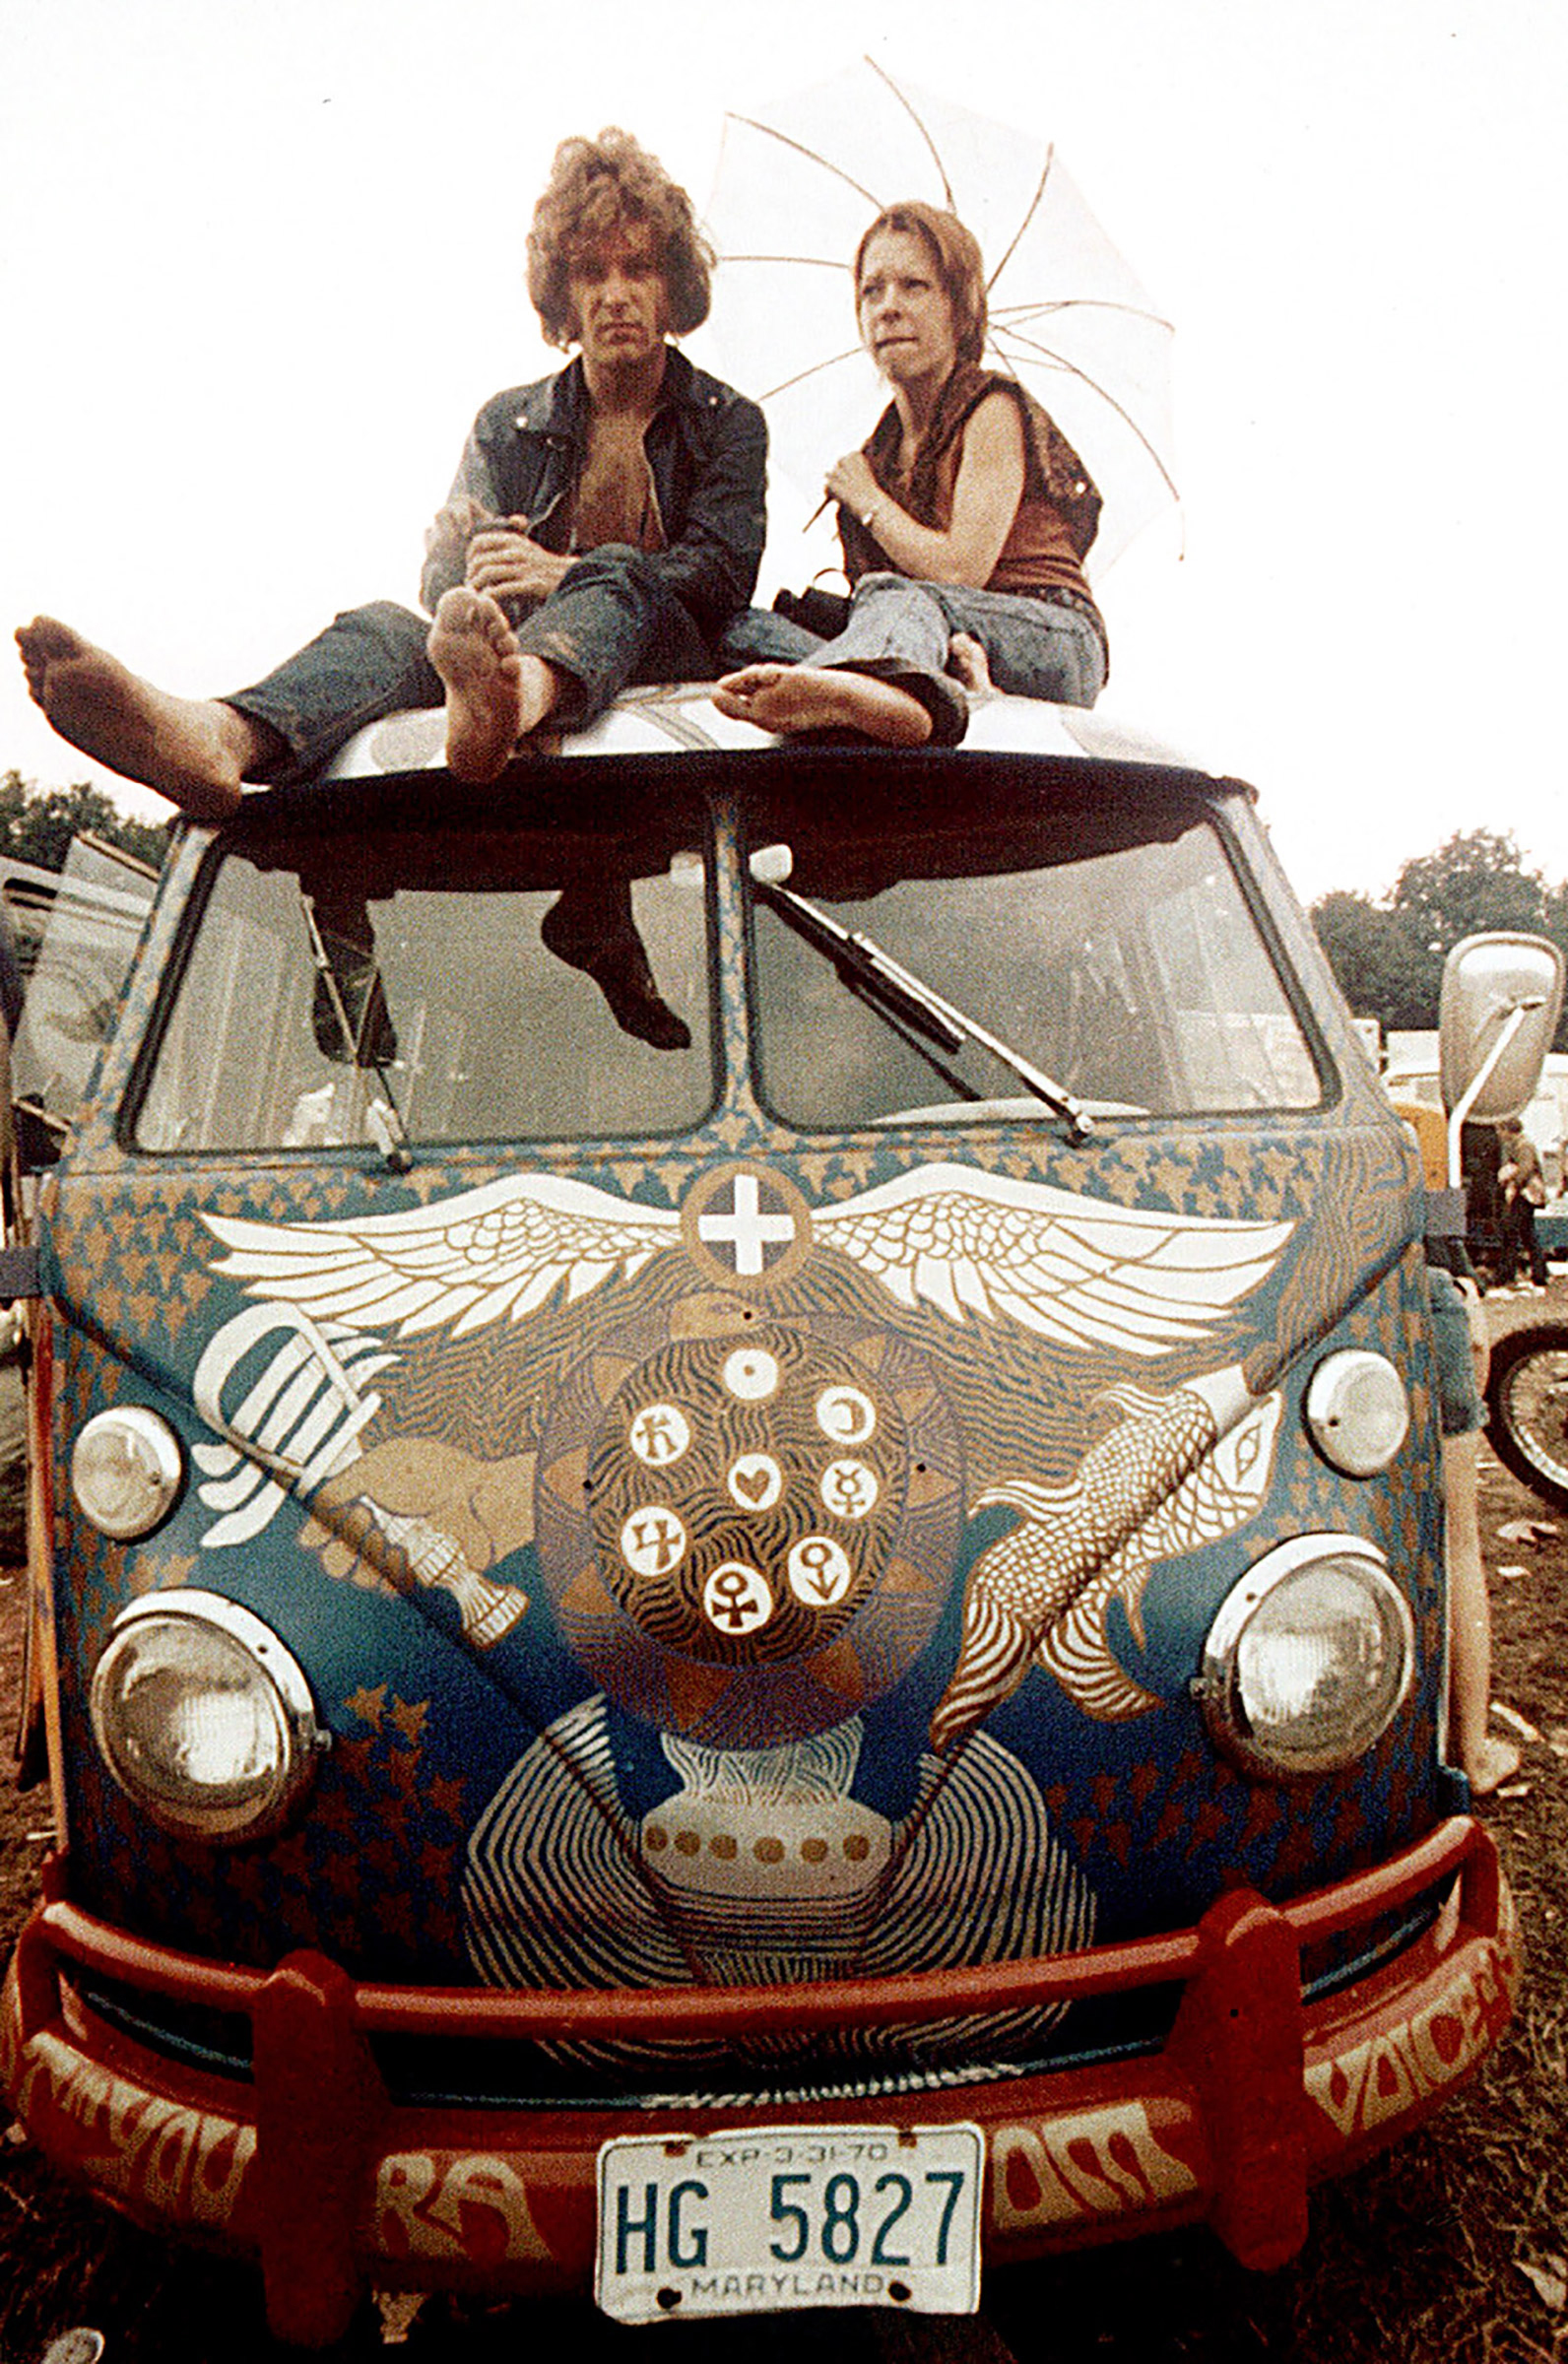 Concert-goers sit on the roof of a Volkswagen bus at the Woodstock Music and Arts Fair at Bethel, N.Y., in mid-August, 1969. (Ron Frem—AP)